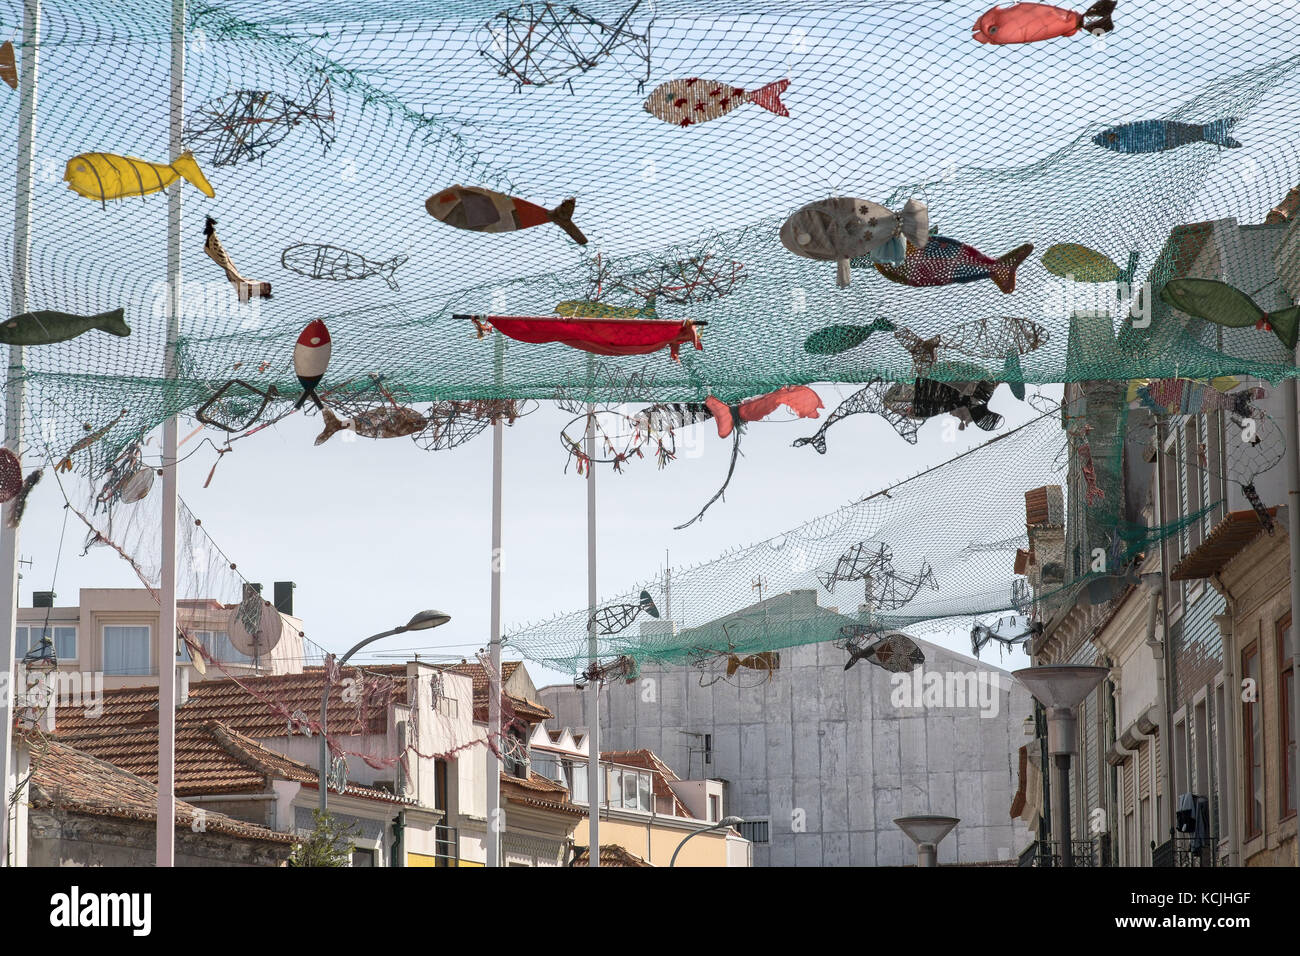 https://c8.alamy.com/comp/KCJHGF/street-decoration-with-fishes-in-a-fishing-net-KCJHGF.jpg